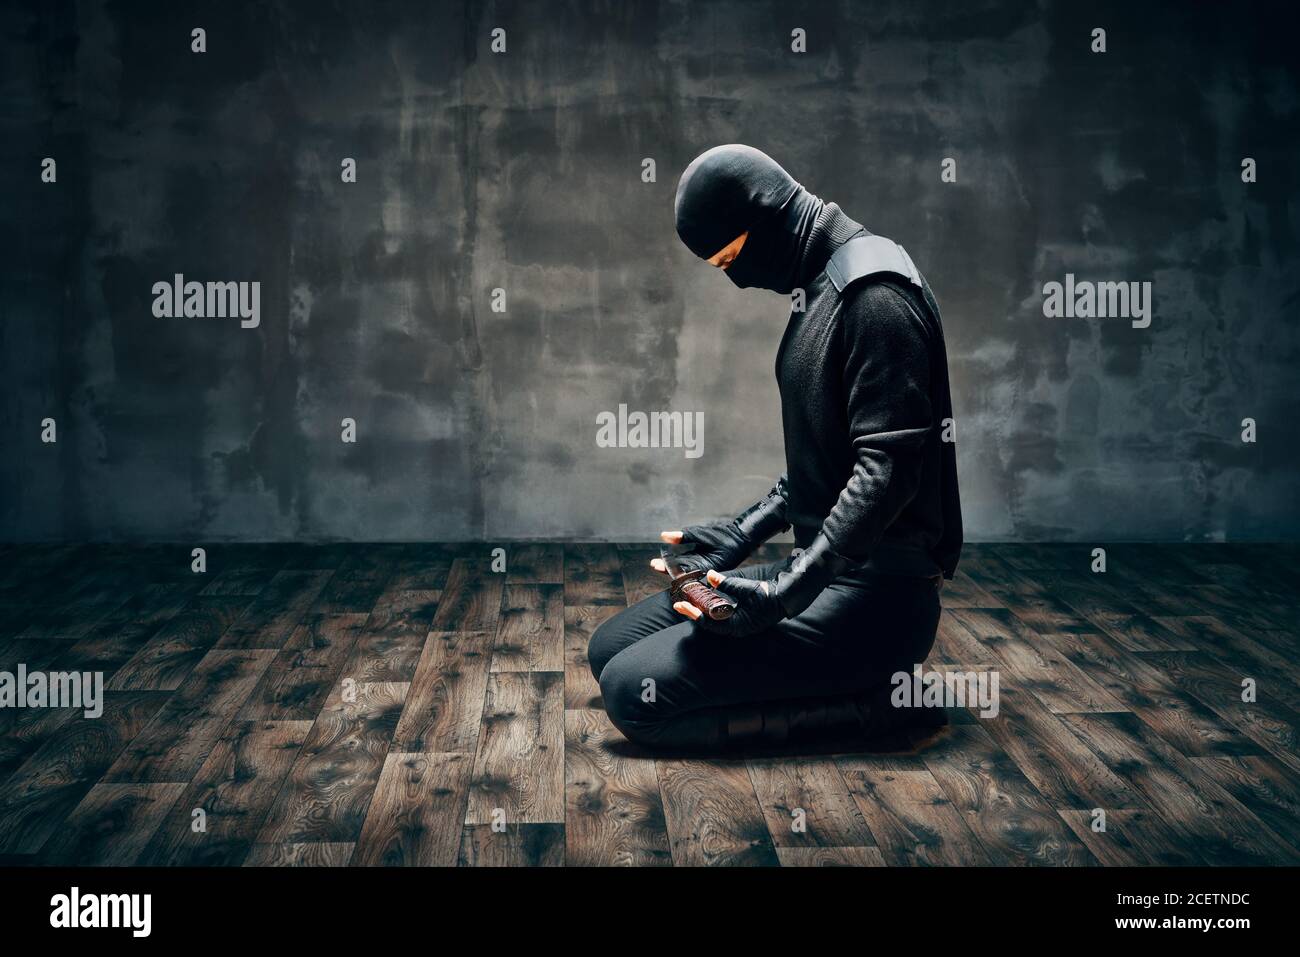 Warrior man sitting on floor posing with a sword over dark background Stock Photo